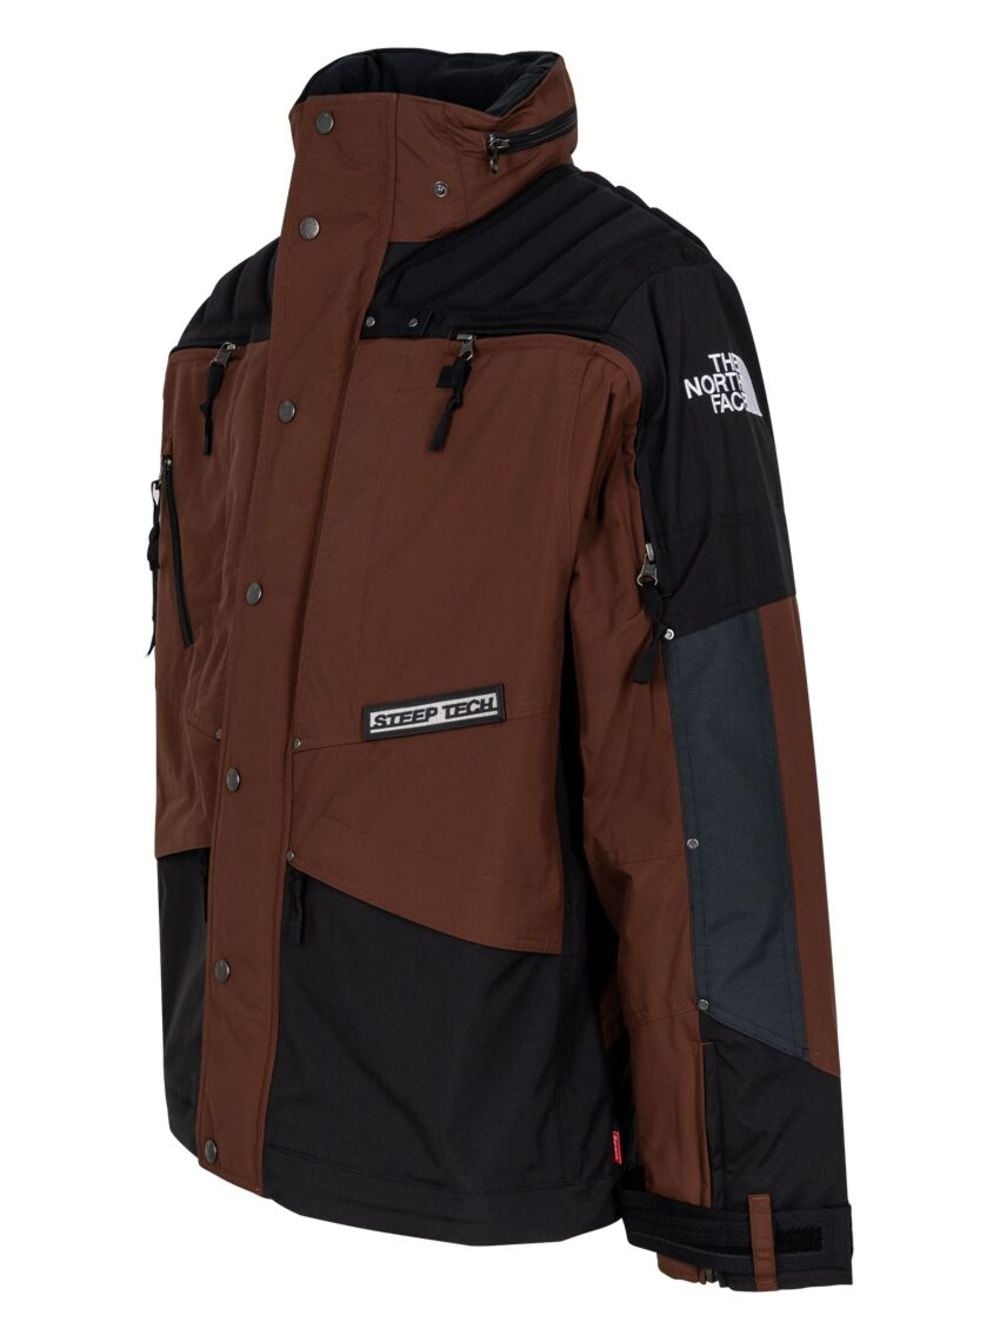 x The North Face Steep Tech Apogee "Brown" jacket - 2